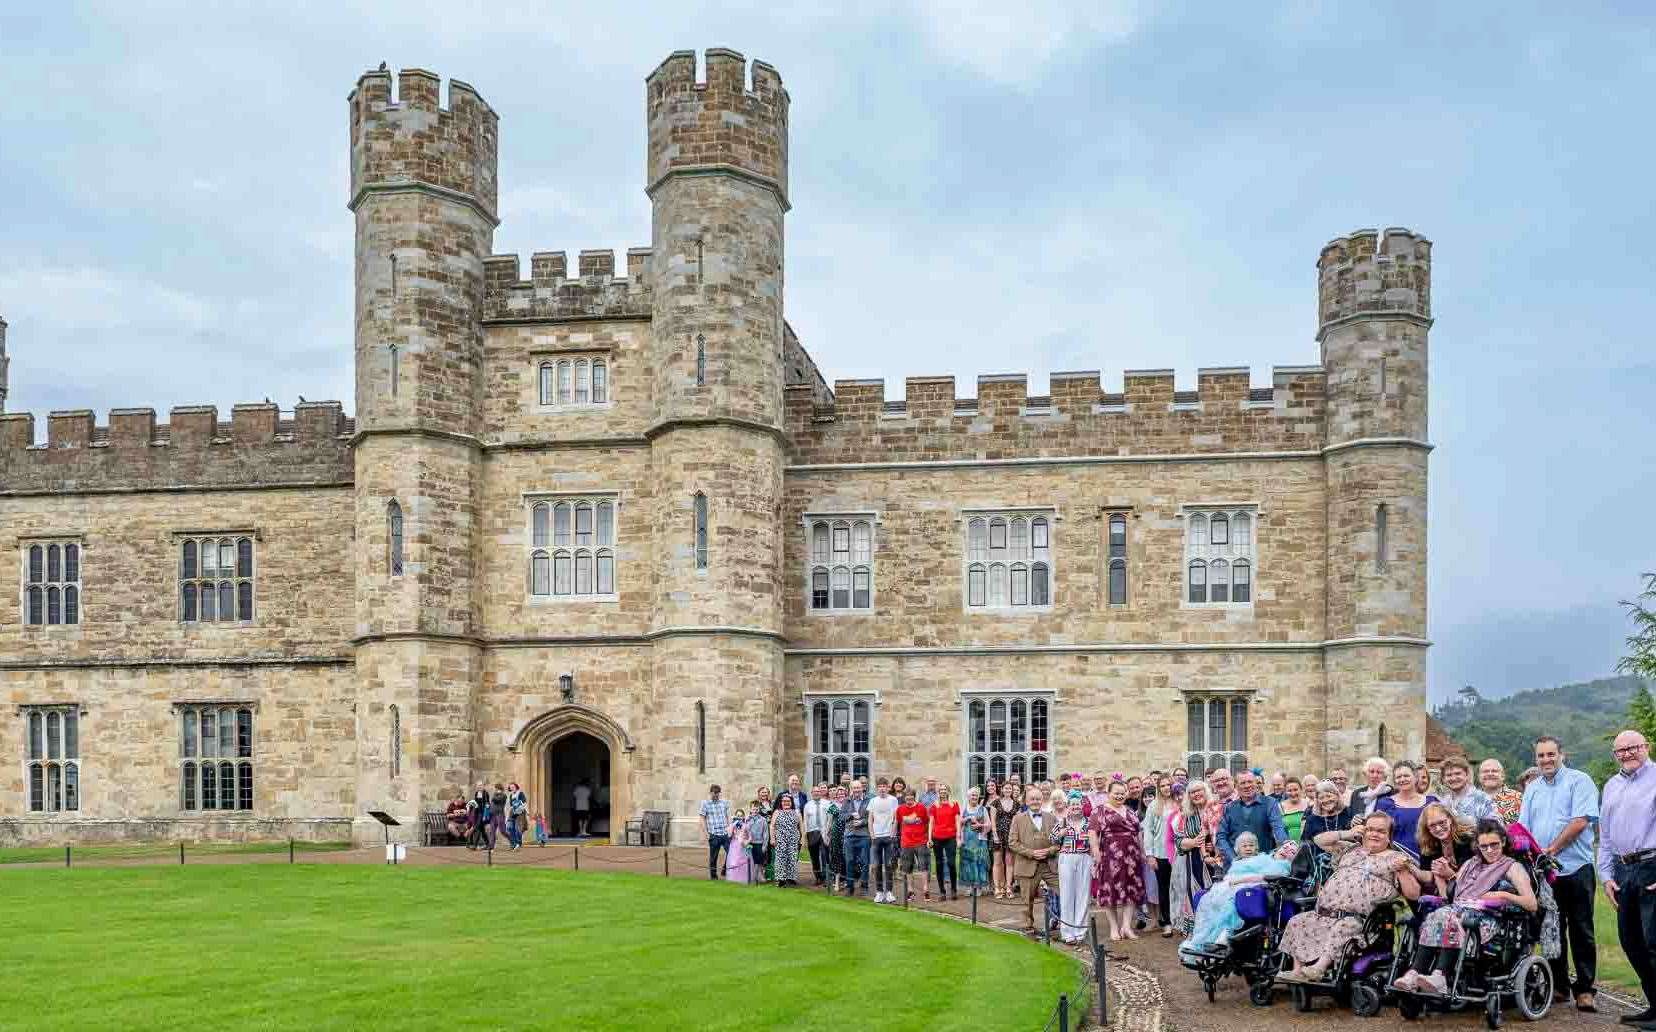 Elke Wisbey celebrated with 100 family and friends at Leeds Castle Photo credit: Fiona Beadle Photography